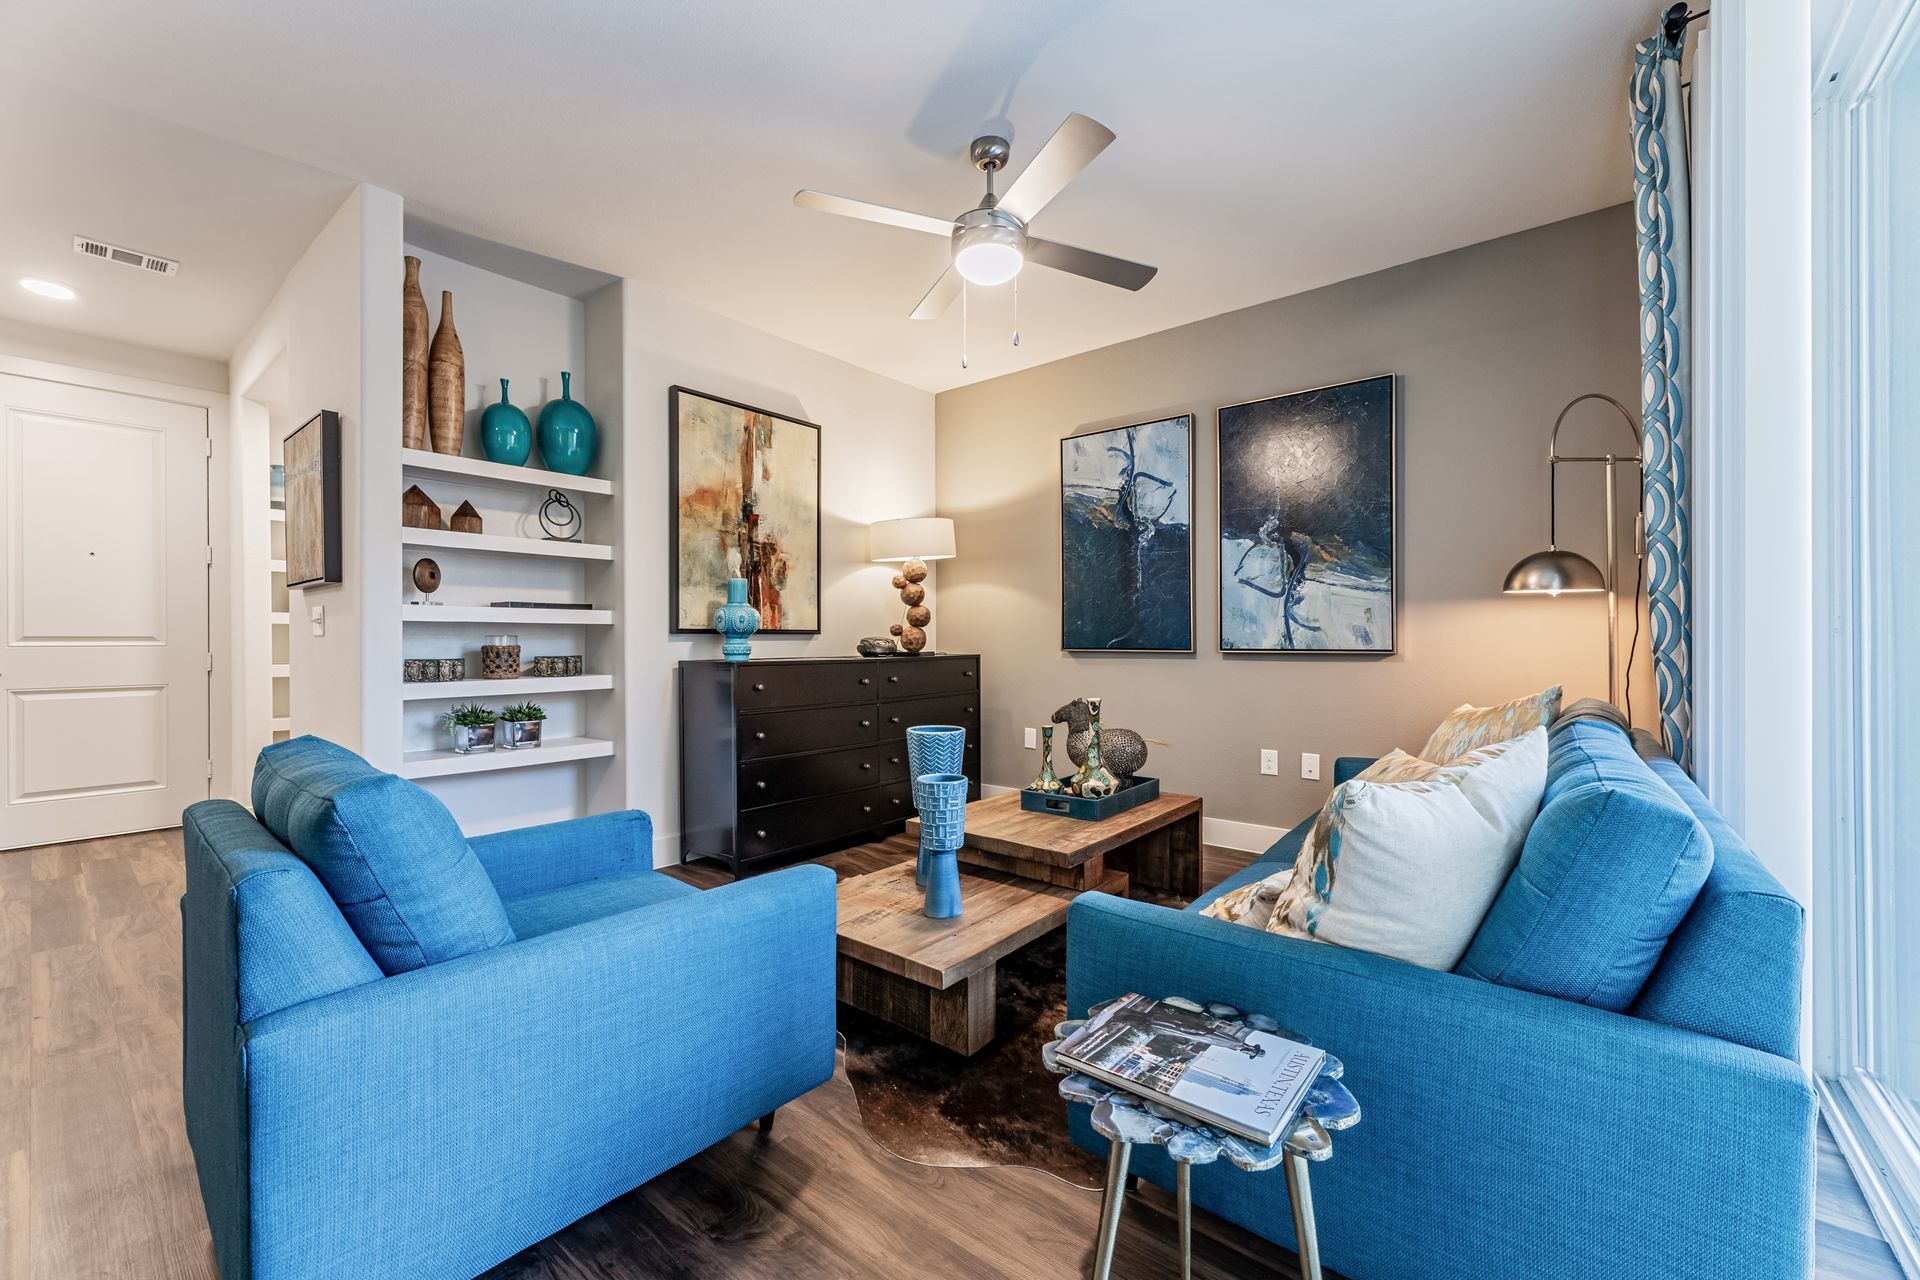 Apartment living room with blue furniture and a ceiling fan at Parkside at Craig Ranch.